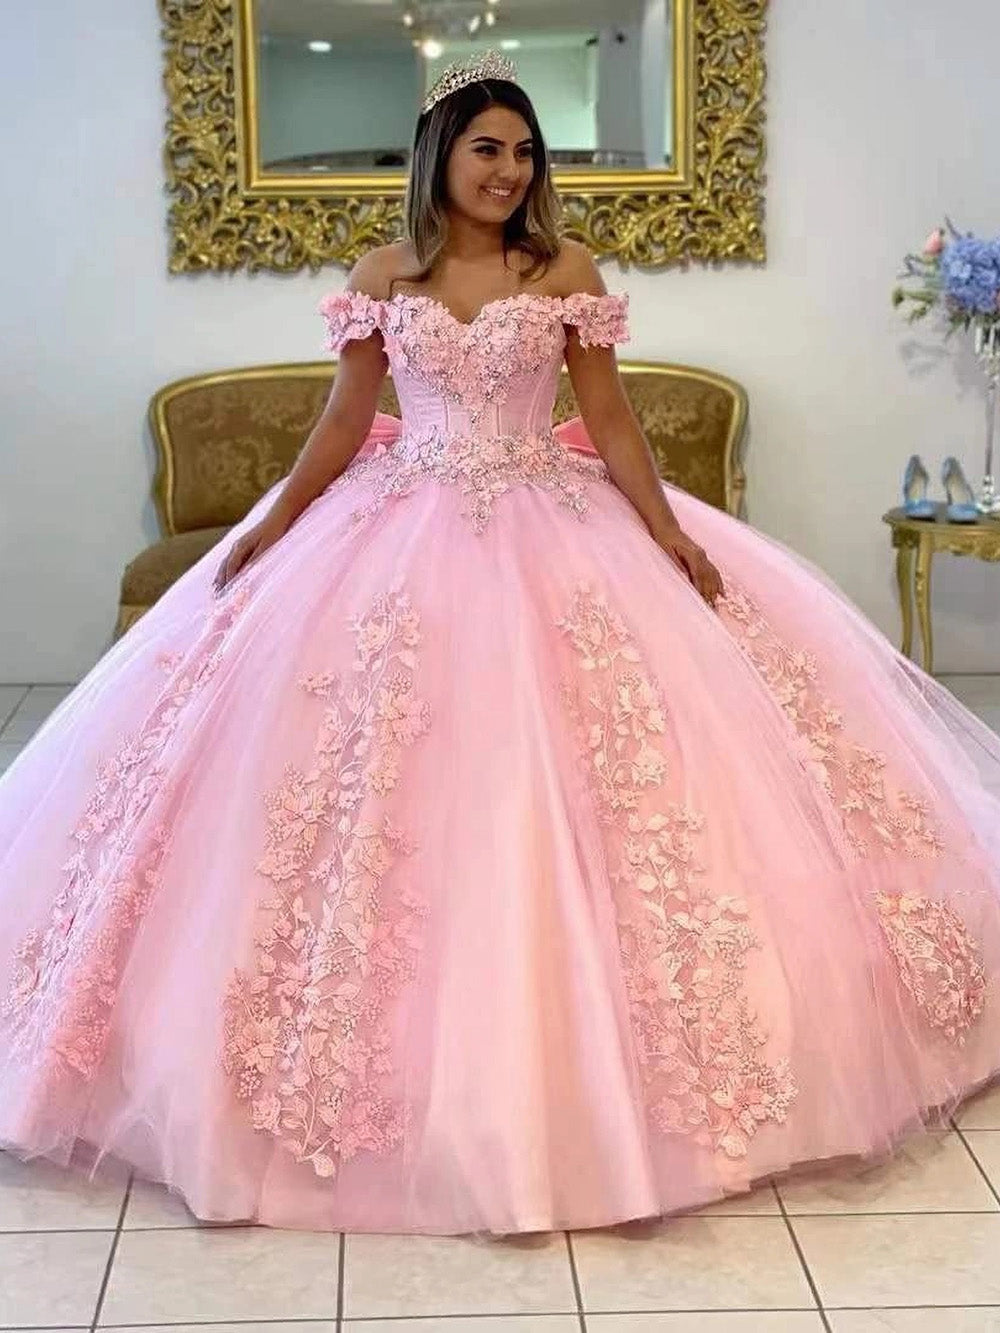 Off The Shoulder Lace Pink Quinceanera Dresses Appliques Beaded Ball Gowns Bow Back Sweet 15 16 Birthday Party Dress